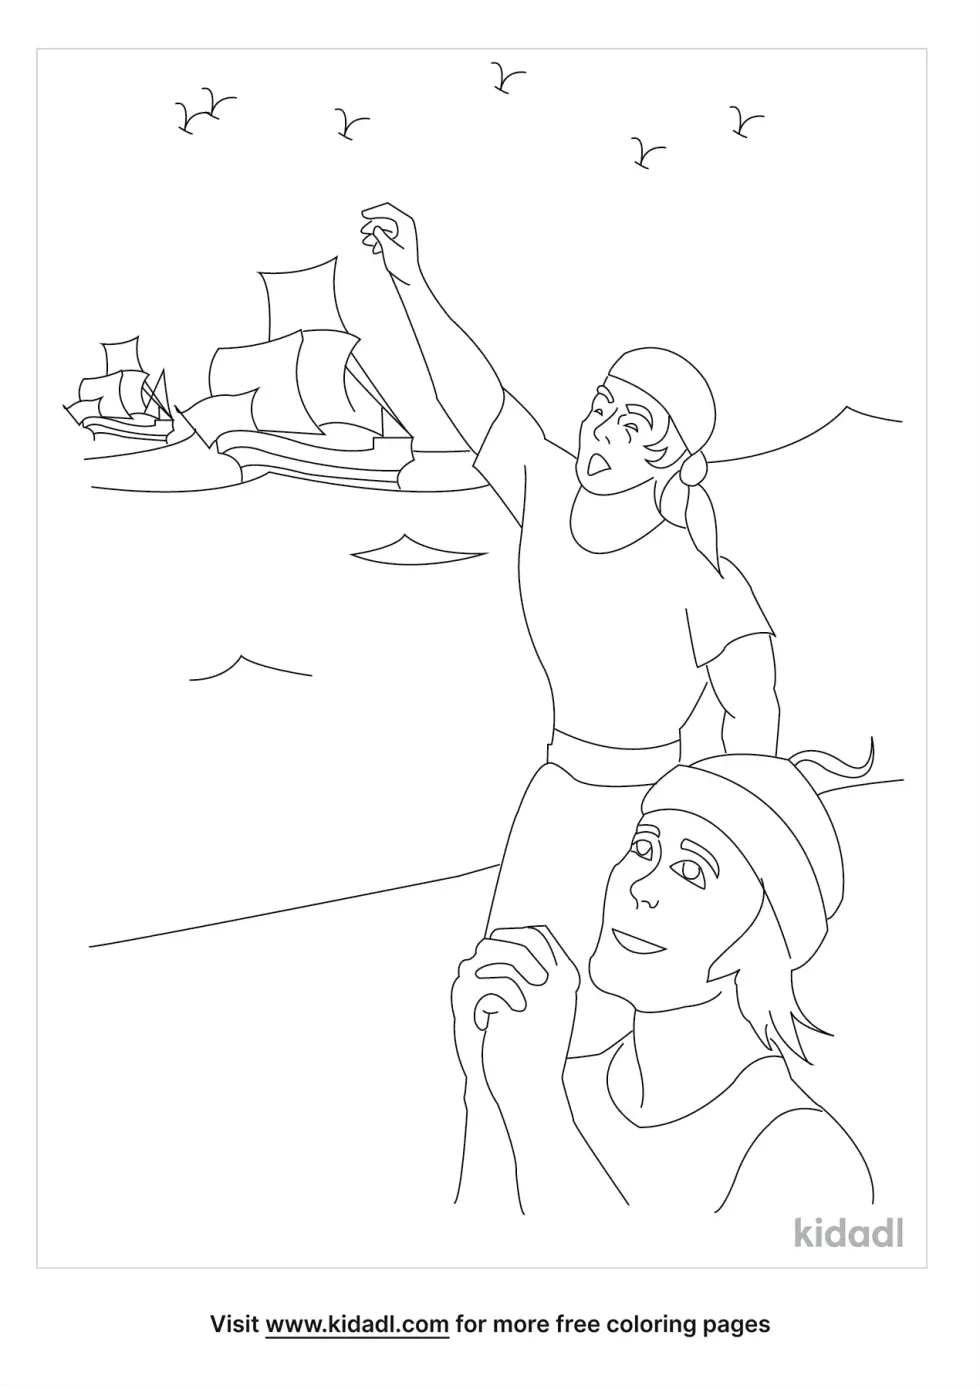 Columbus And Natives Coloring Page